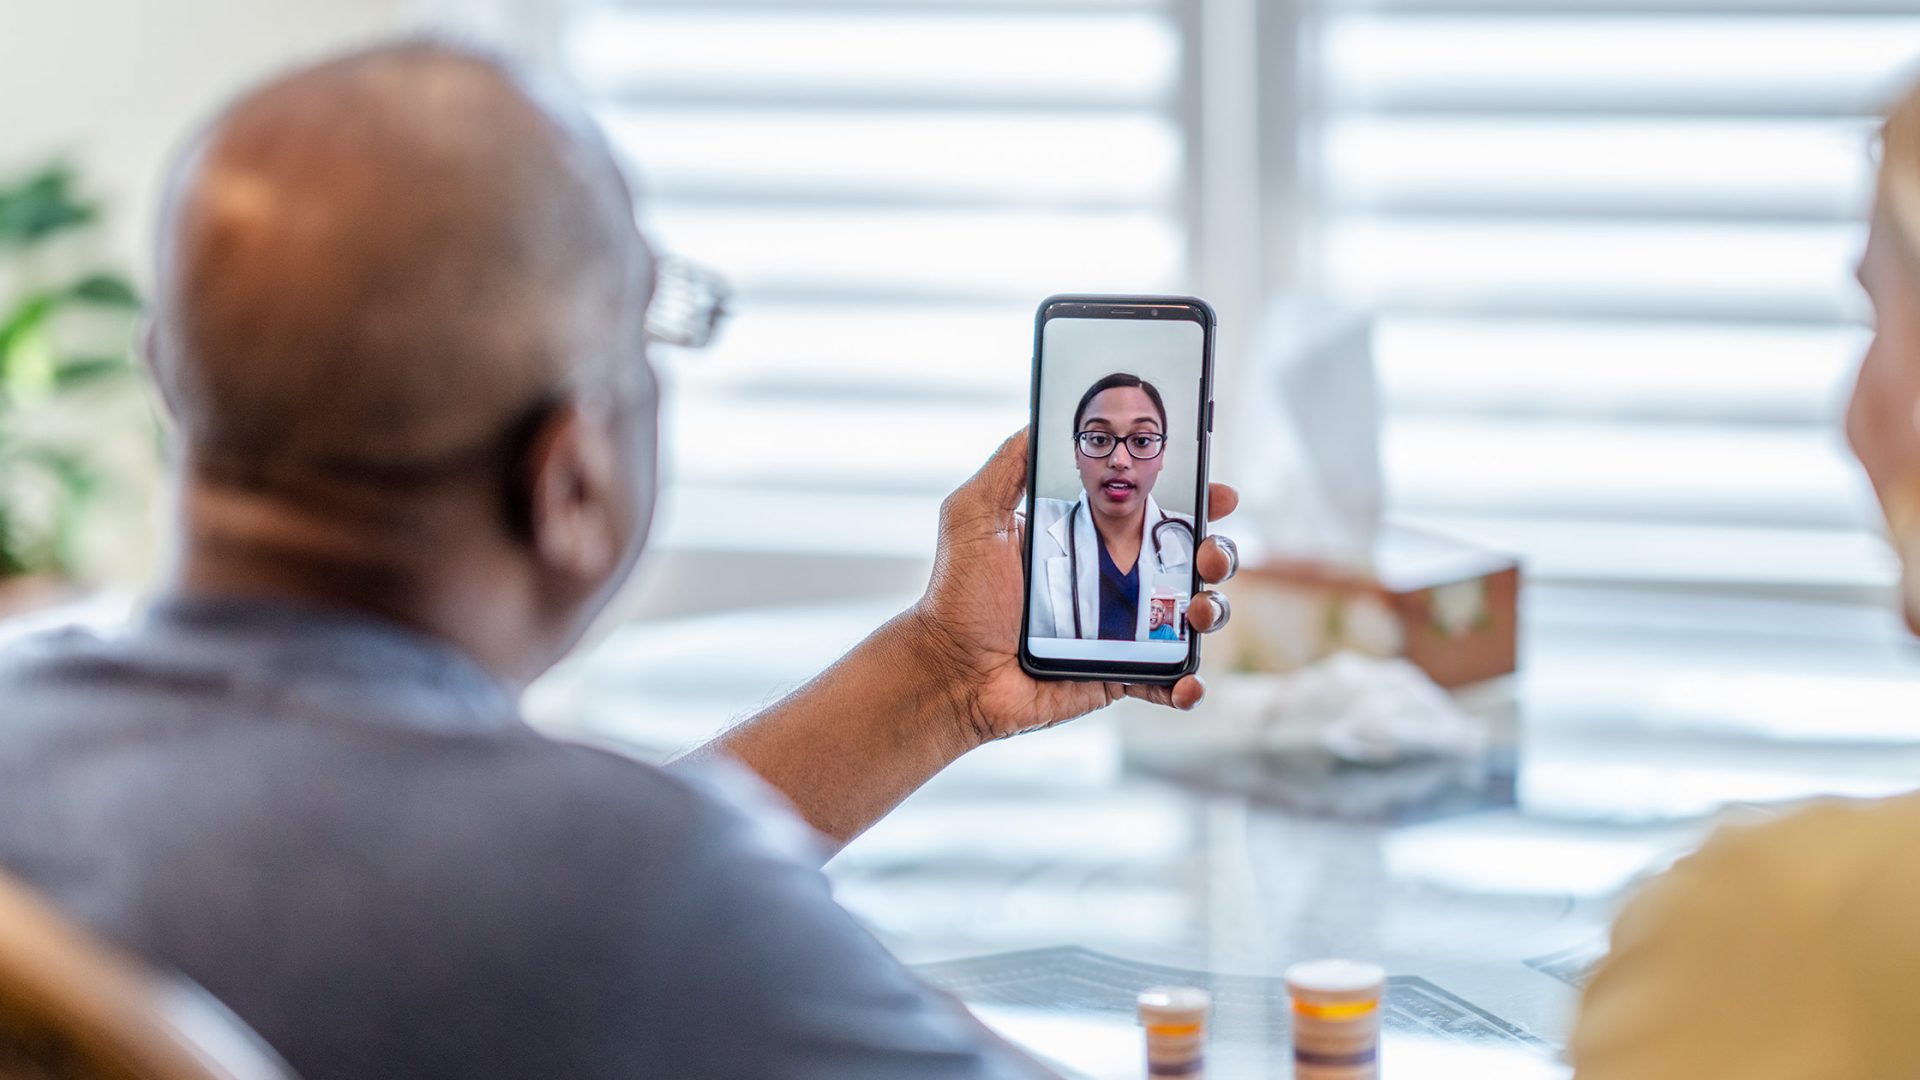 Person Having Video Appointment with Doctor via Mobile Phone